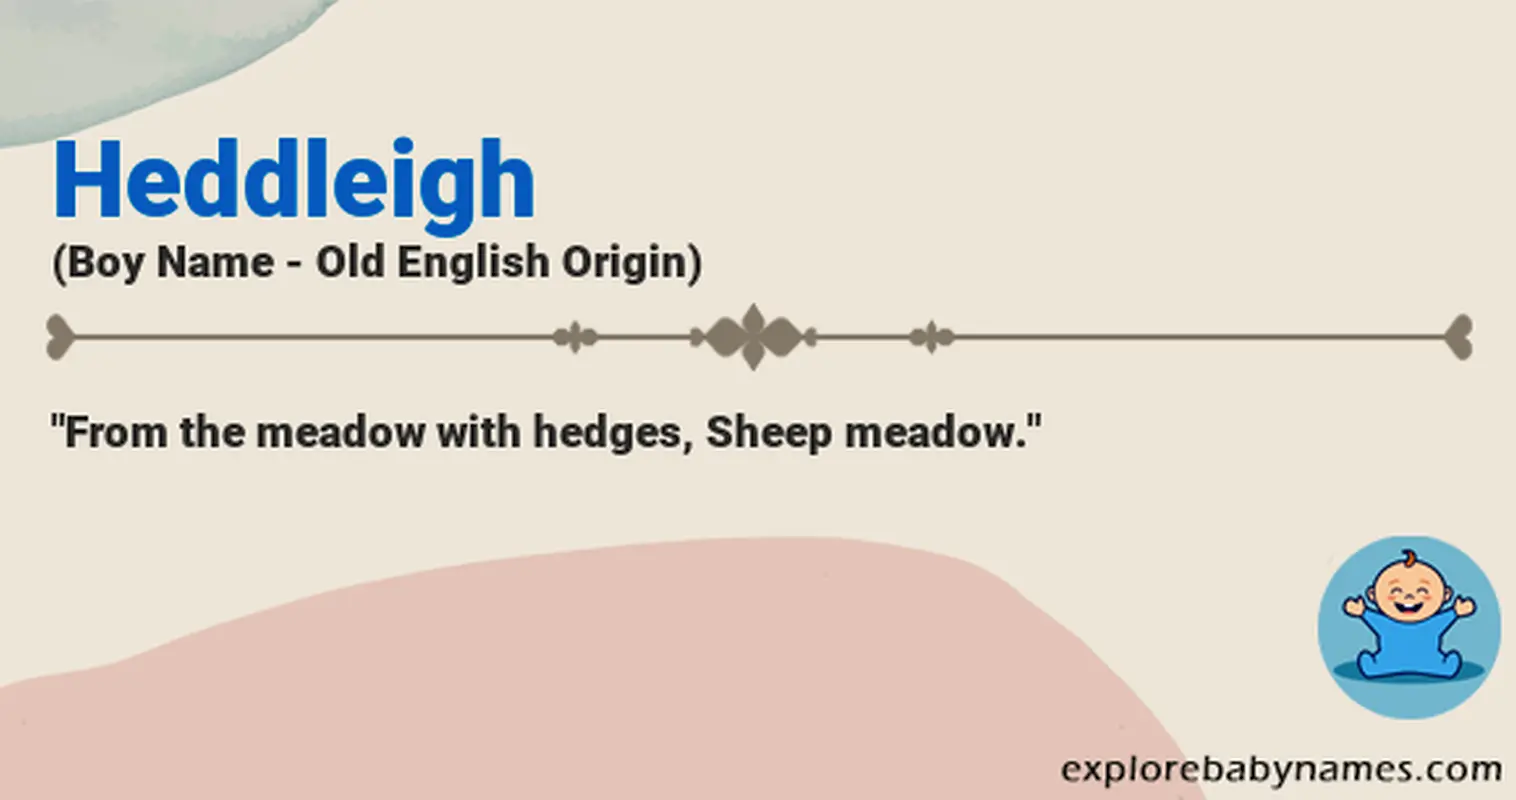 Meaning of Heddleigh